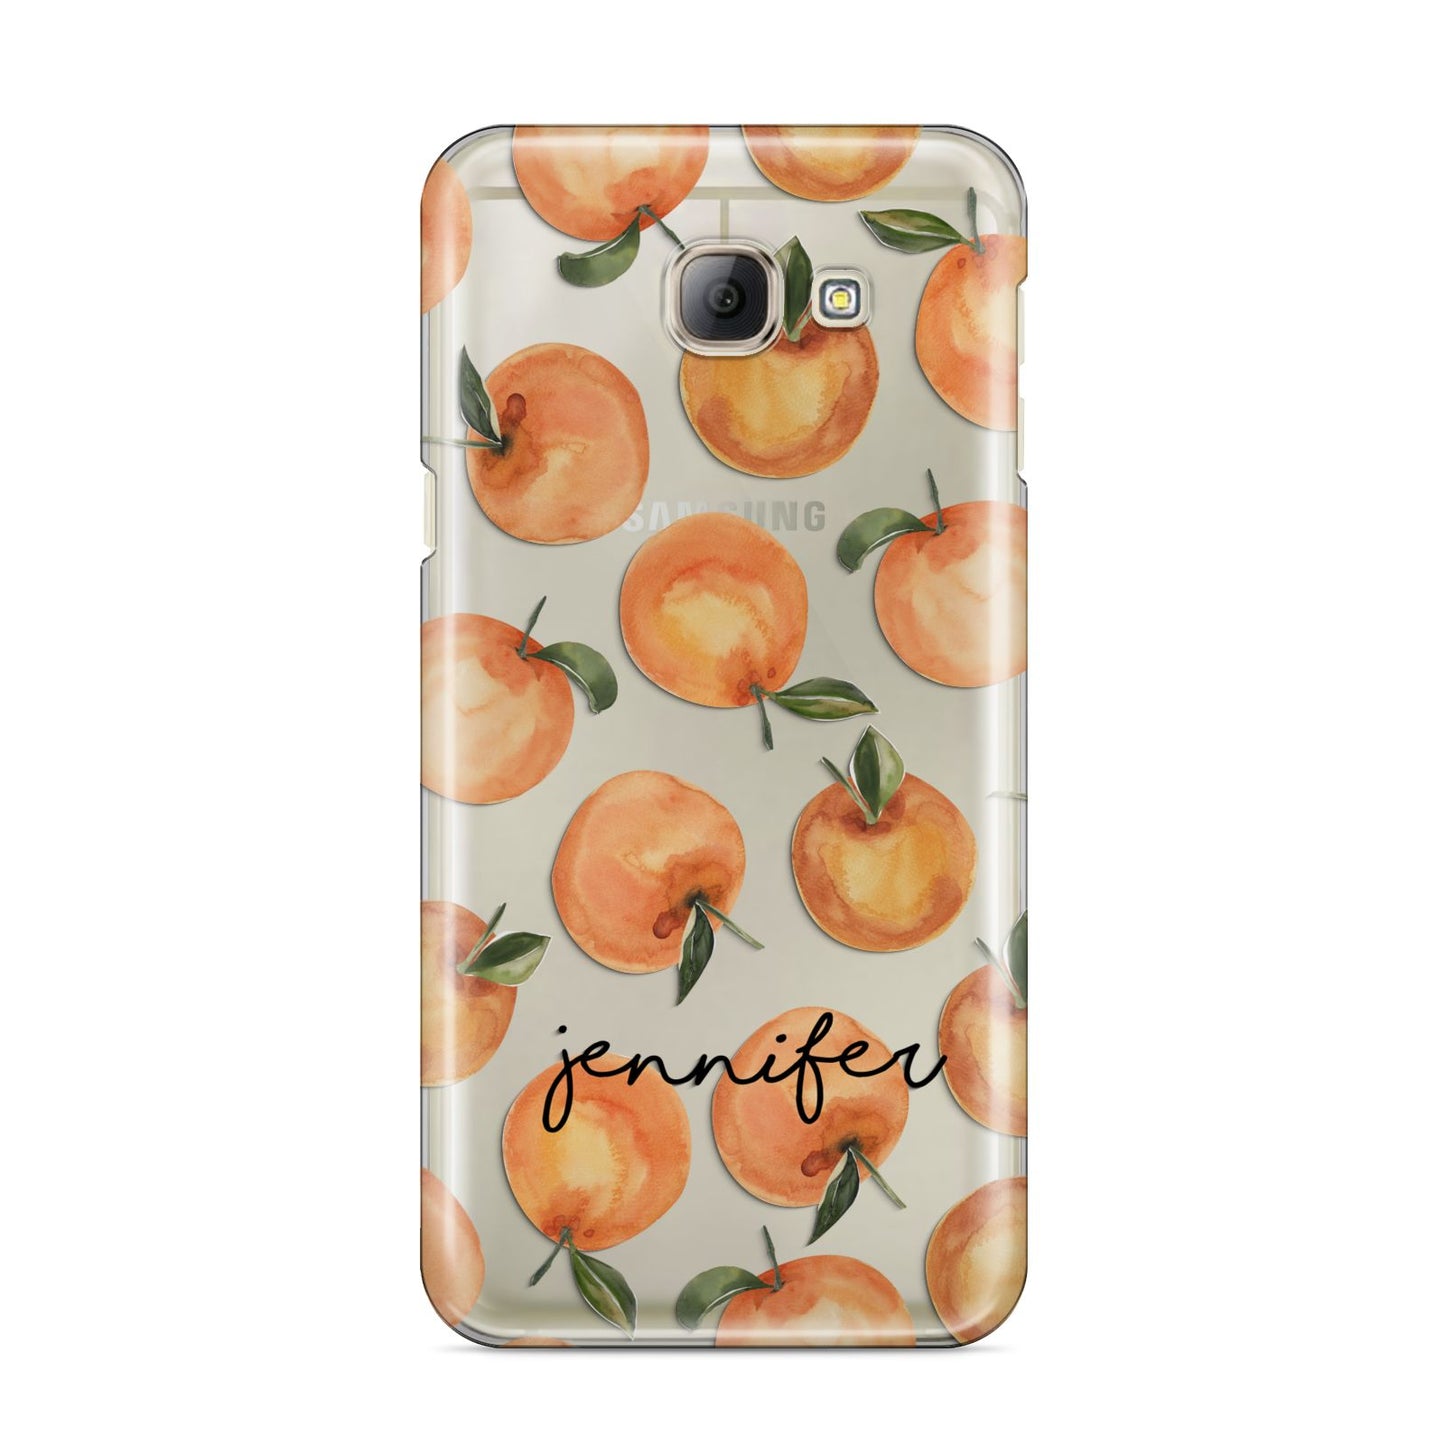 Personalised Oranges Name Samsung Galaxy A8 2016 Case